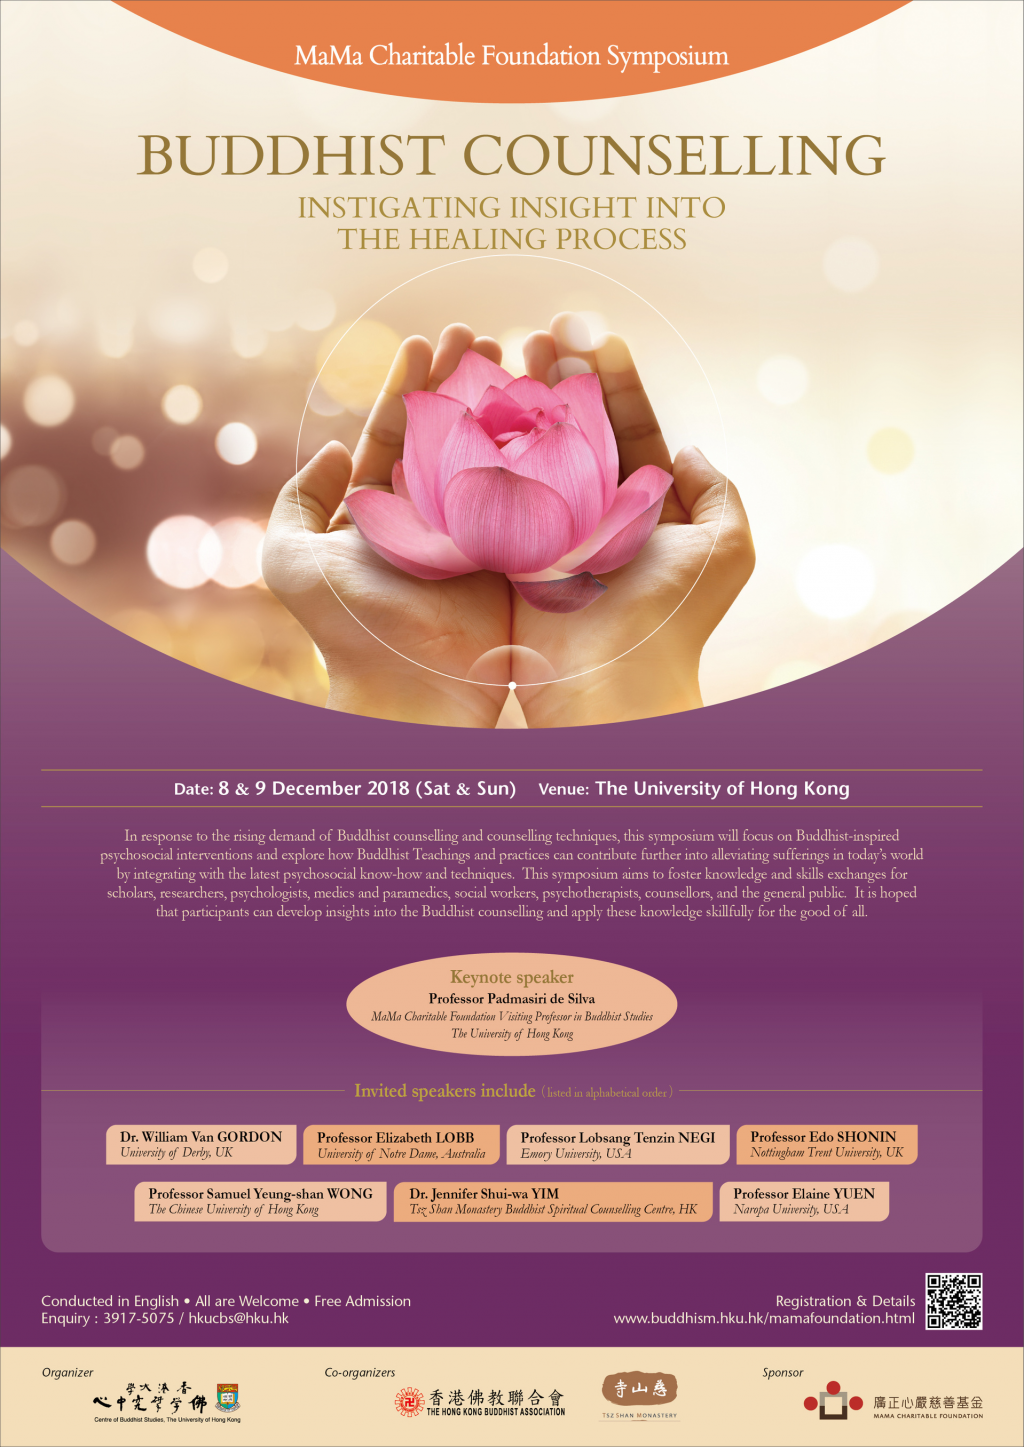 MaMa Charitable Foundation Symposium: Buddhist Counselling - Instigating Insight into the Healing Process